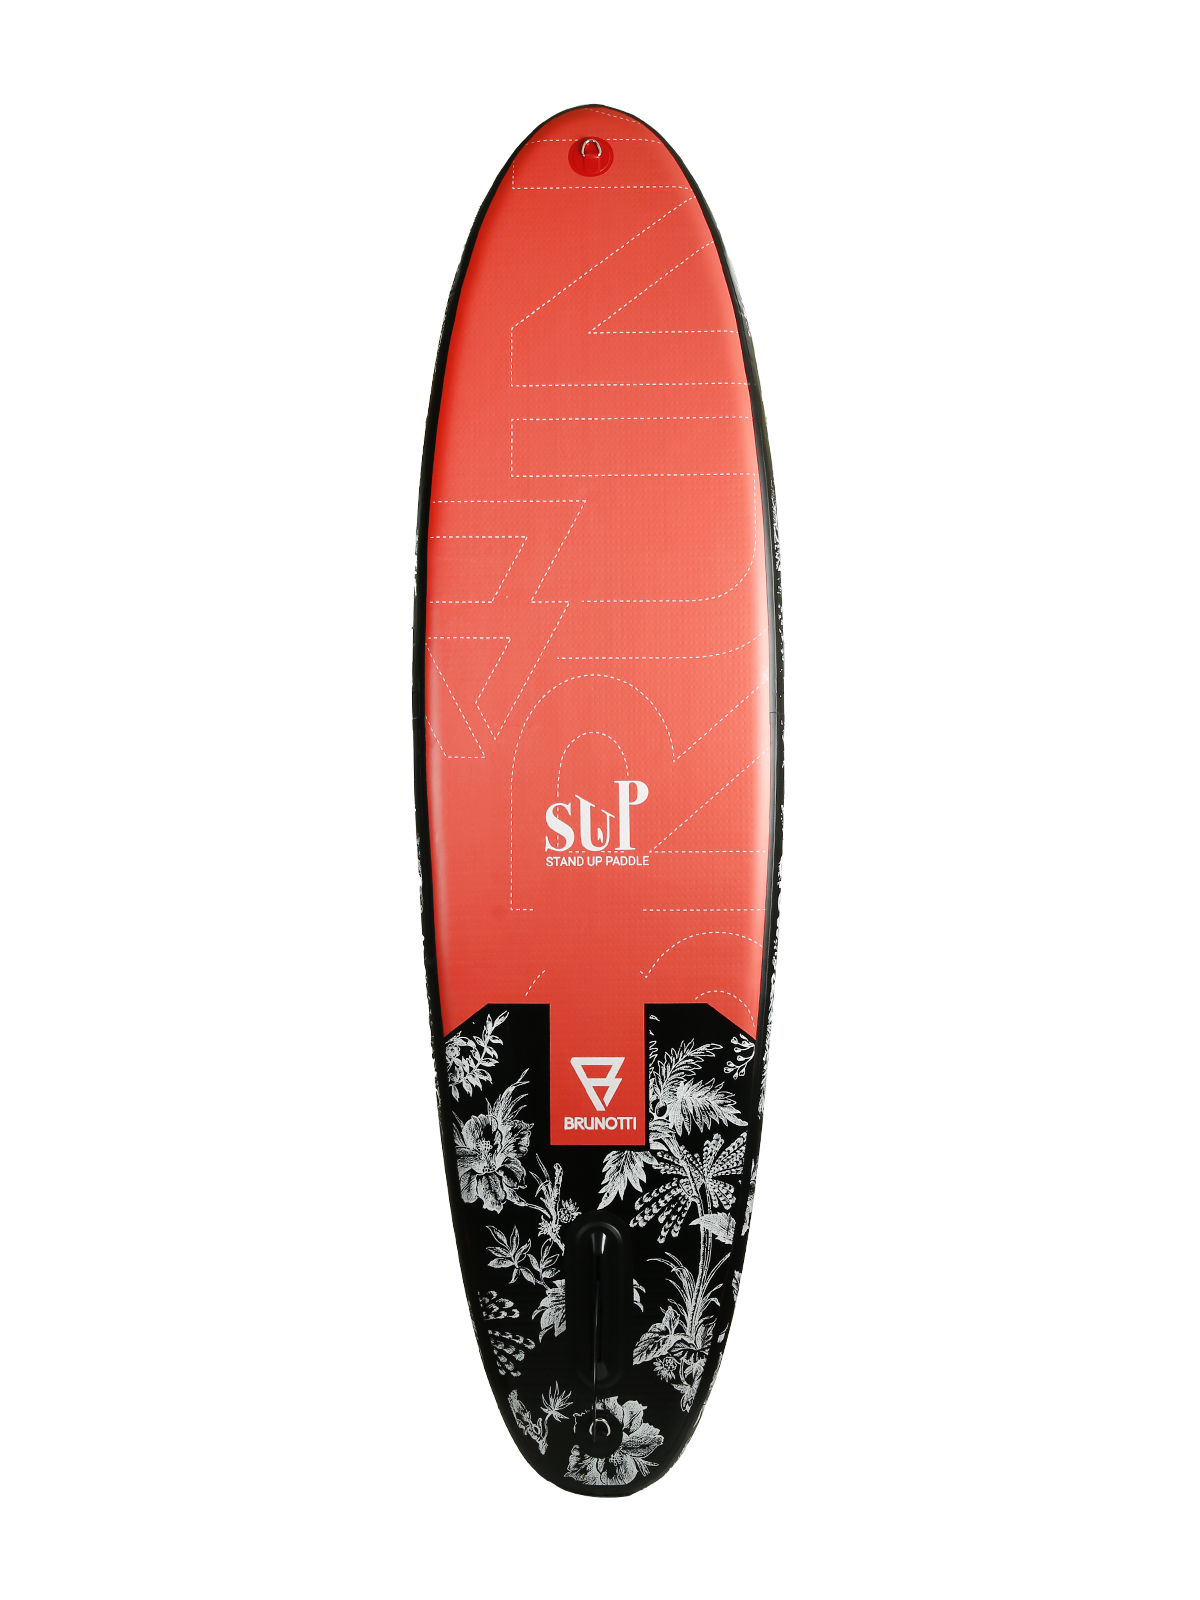 Glow SUP Board | Red